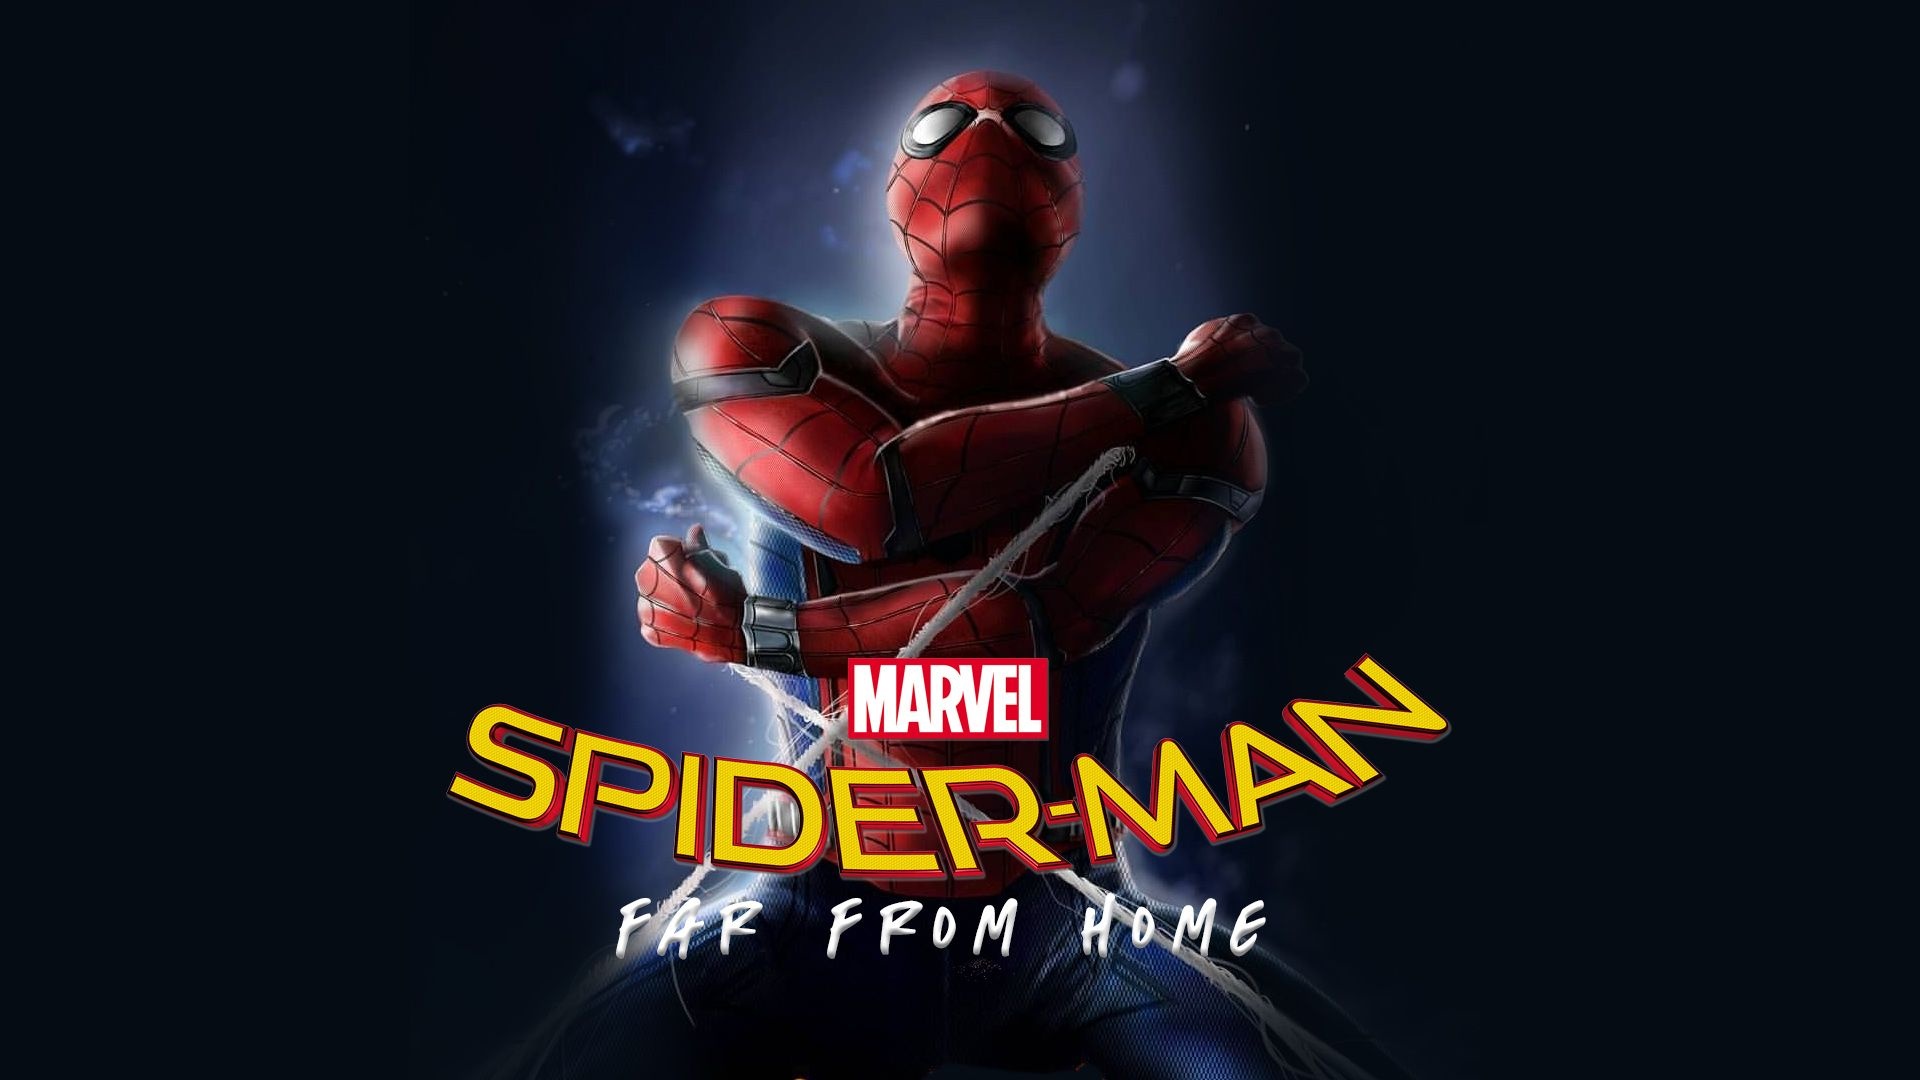 Spider-Man: Far from Home, High-definition wallpapers, Action-packed adventure, Web-slinging hero, 1920x1080 Full HD Desktop